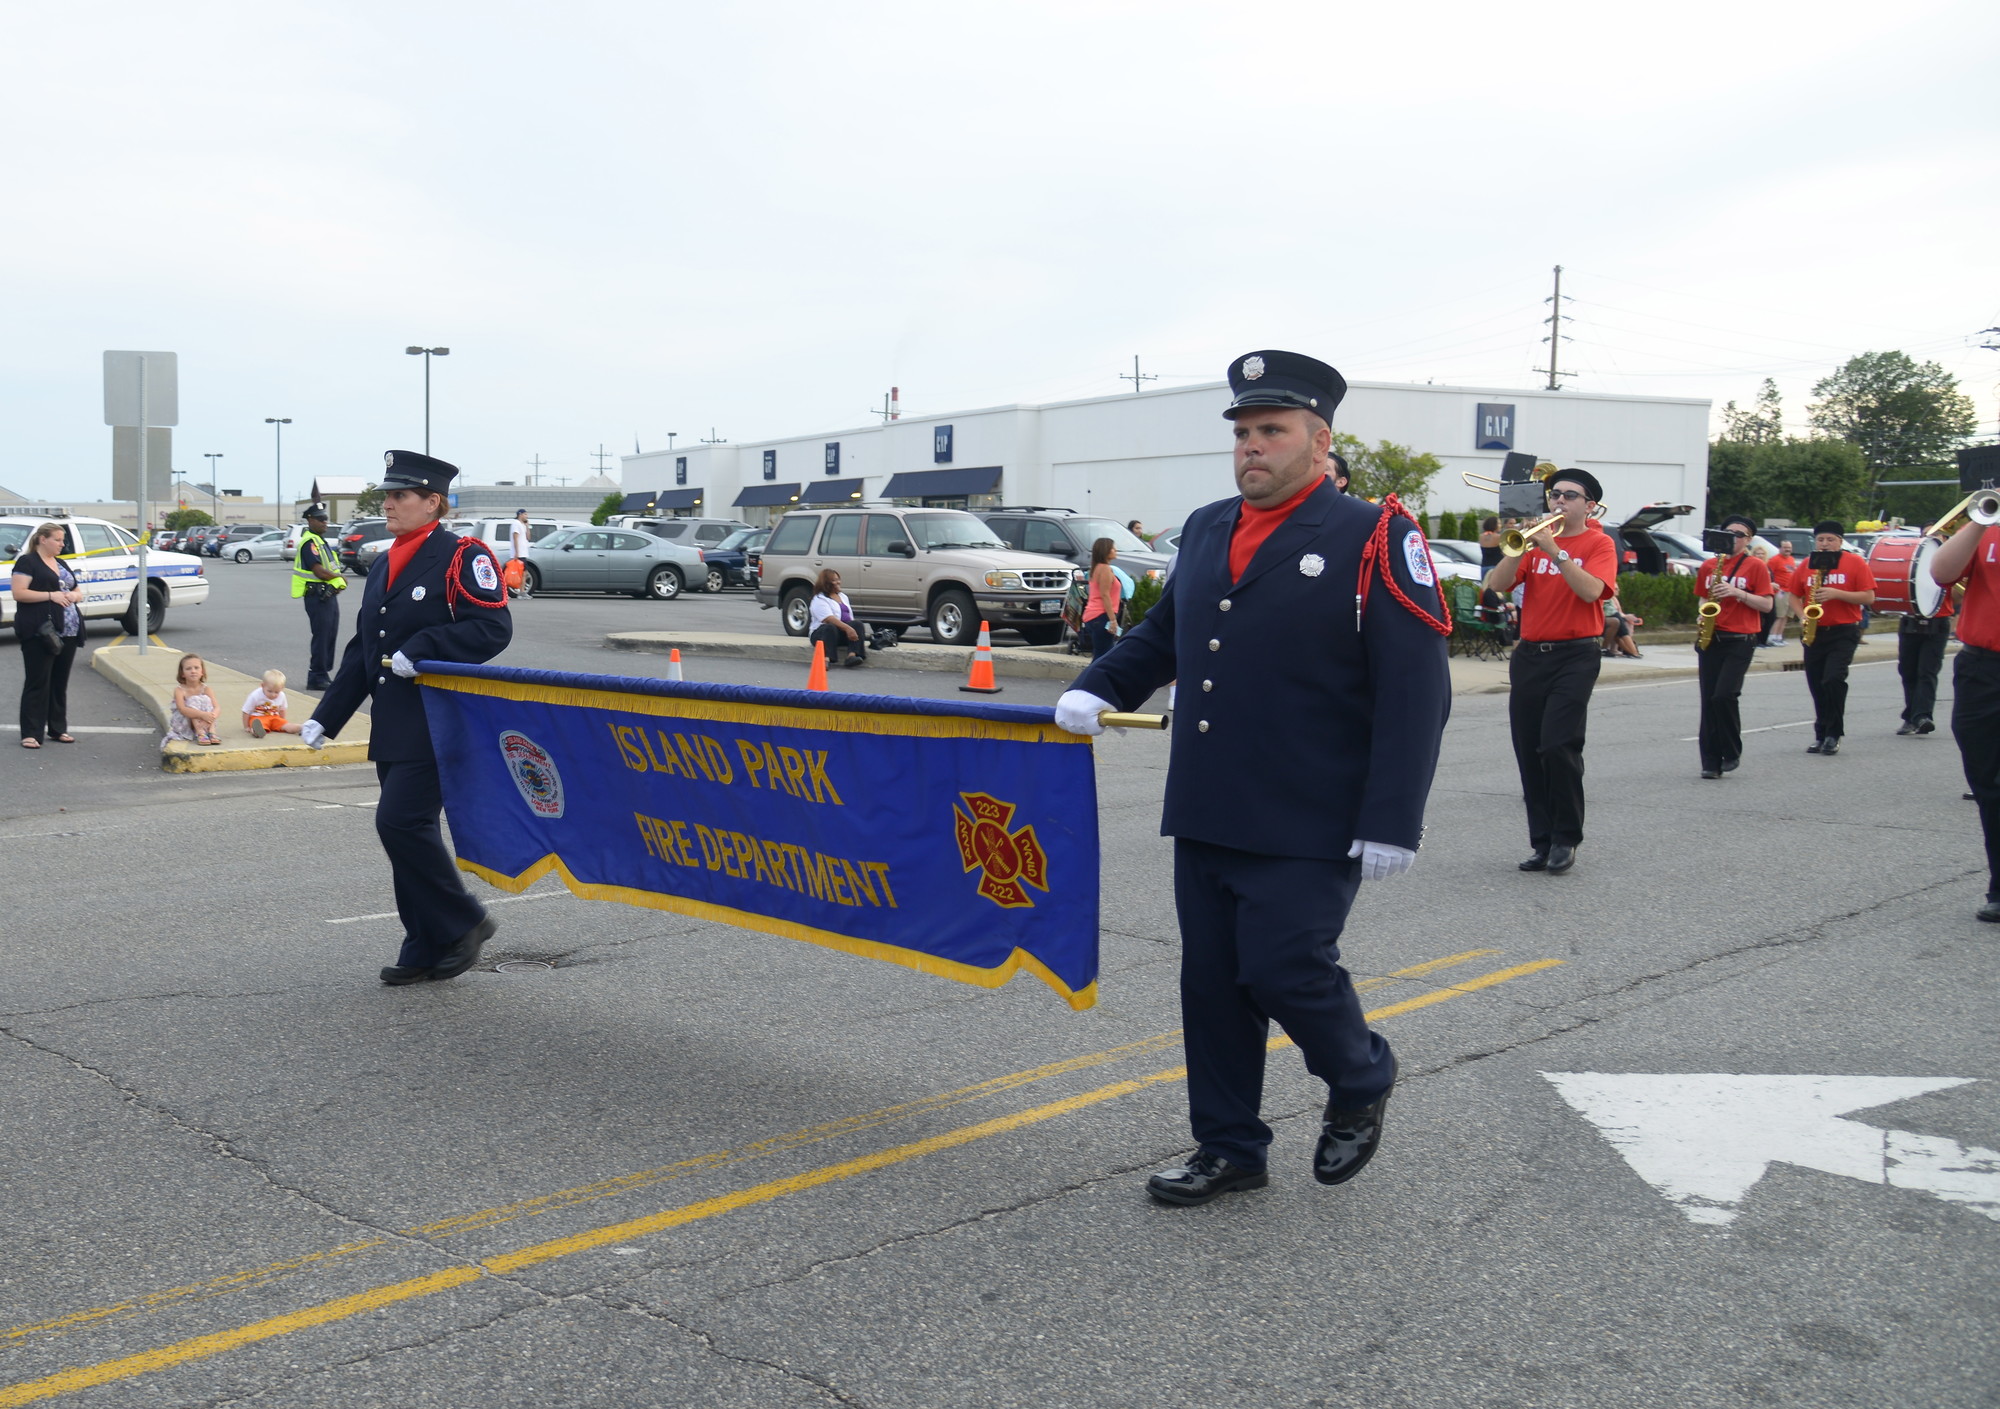 The Island Park Fire Department marched on Saturday. (Penny Frondelli/Herald)